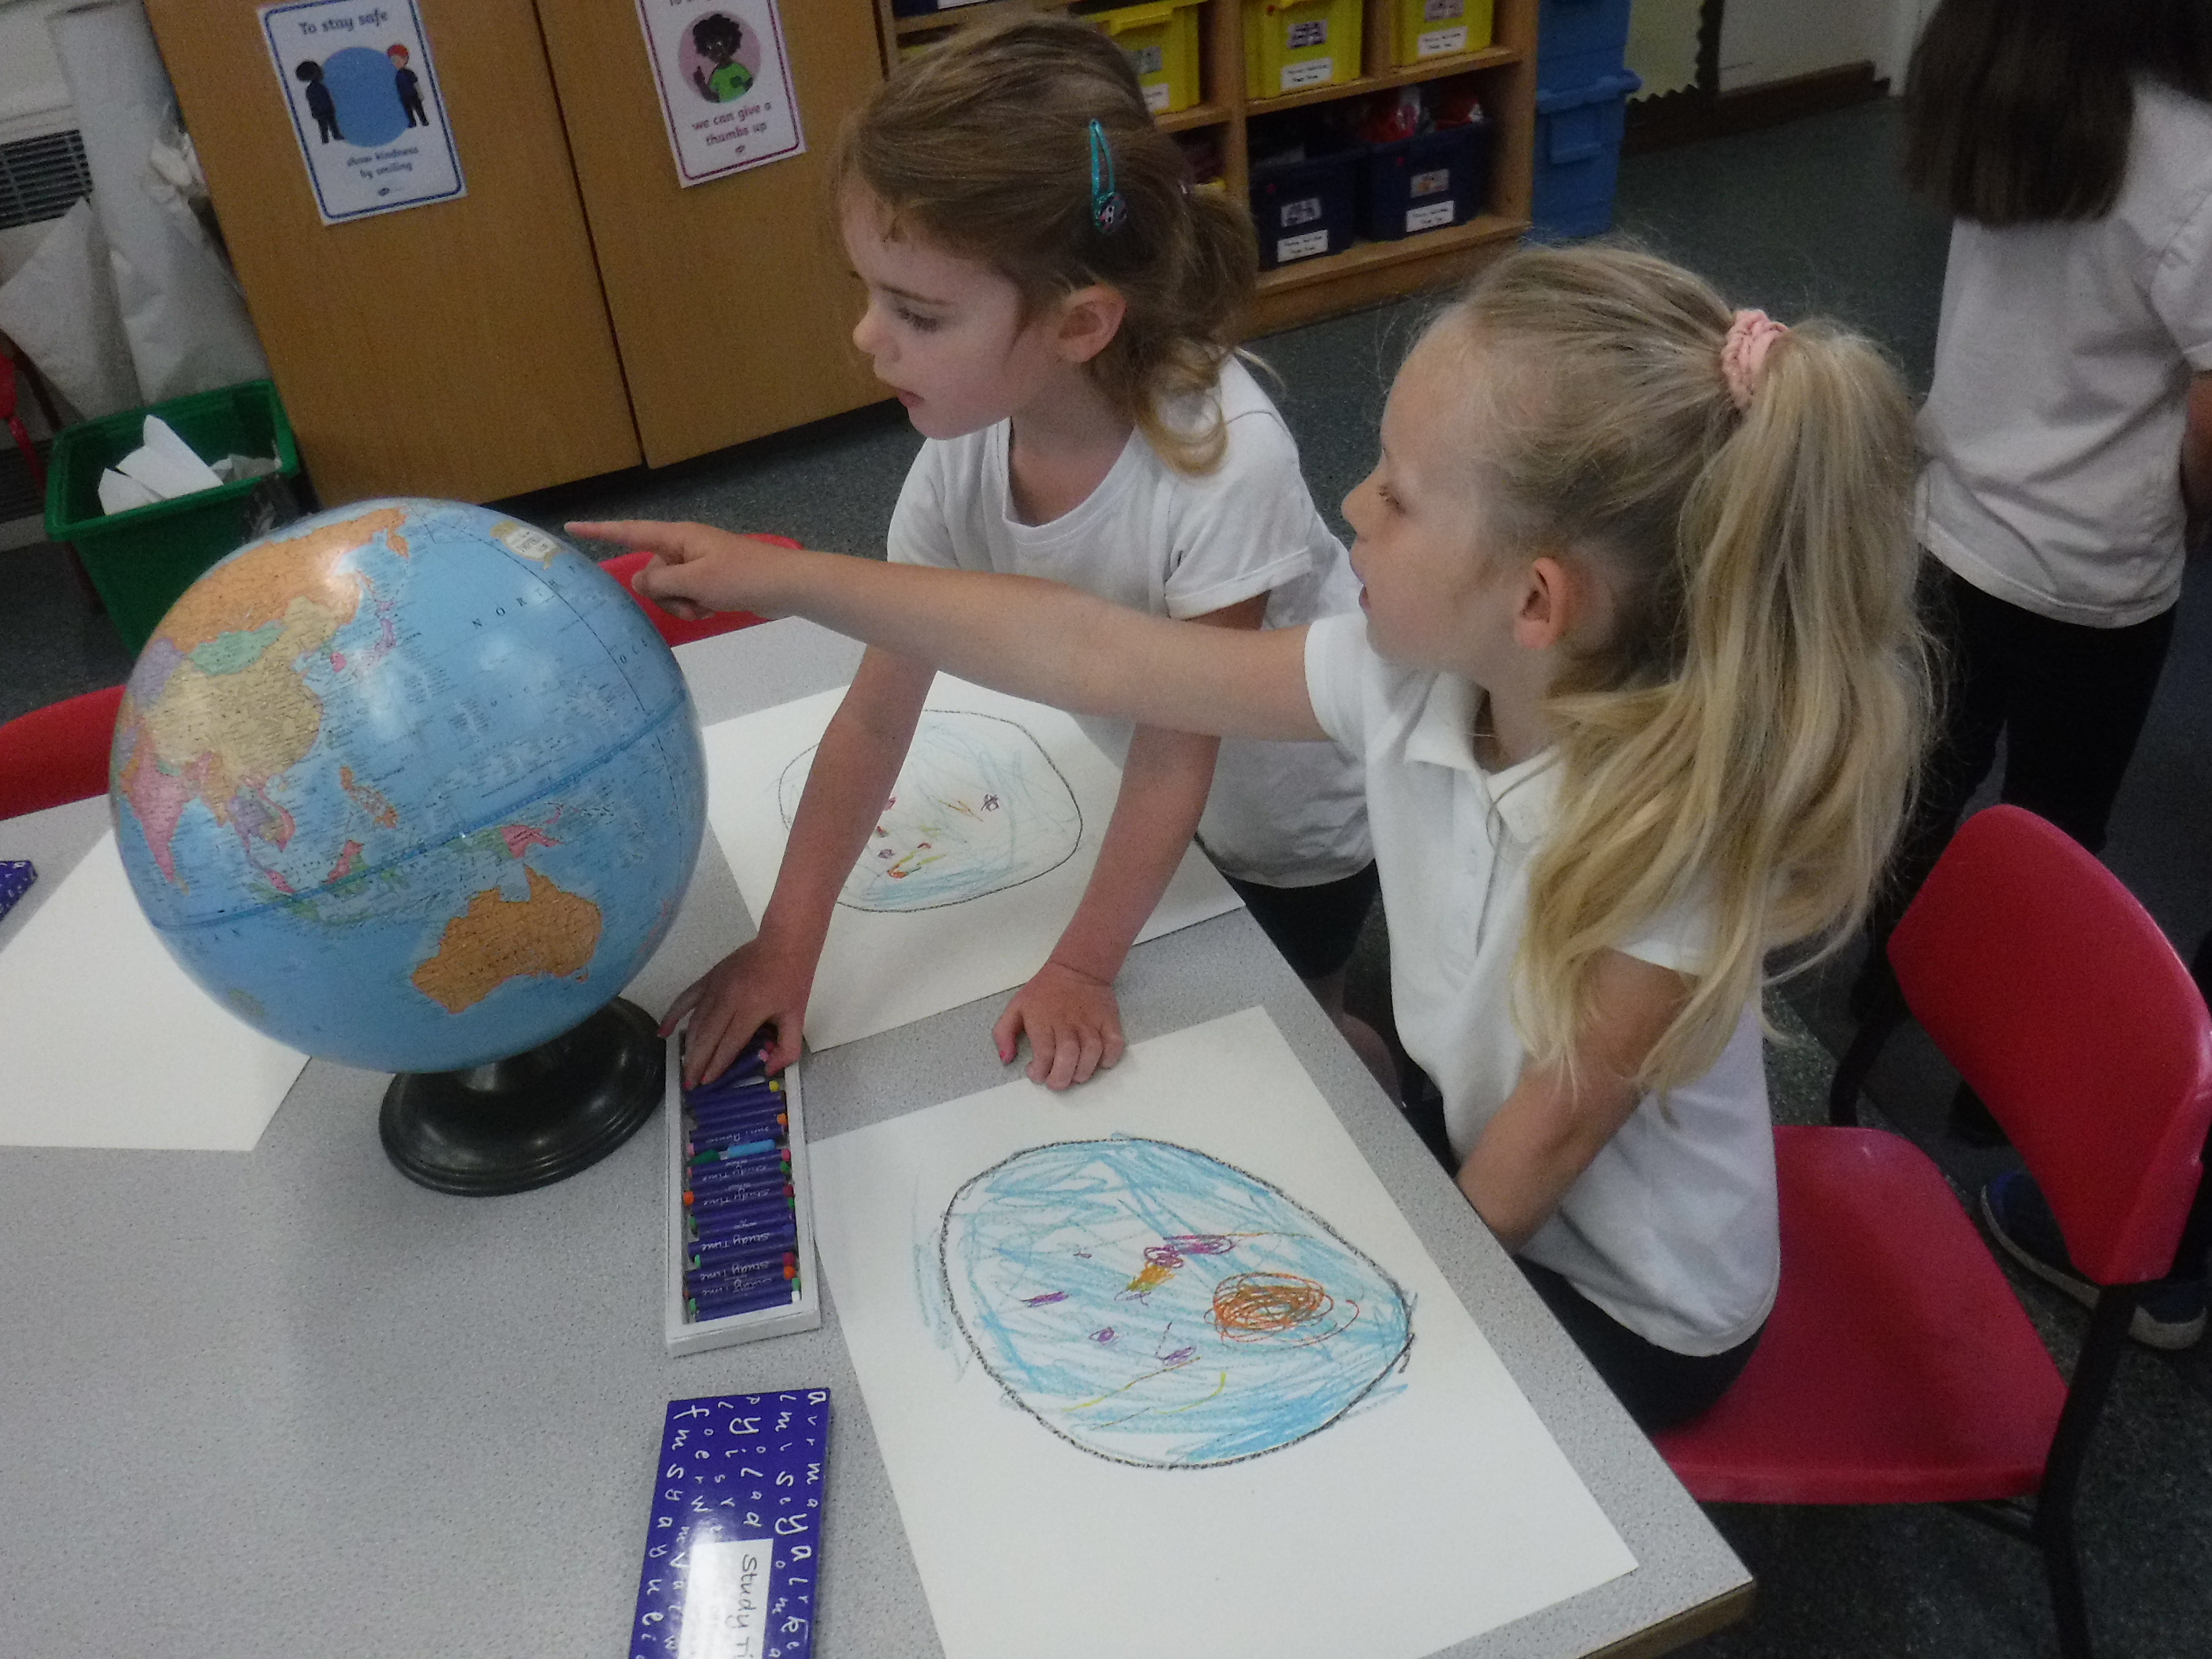 Identifying continents and oceans